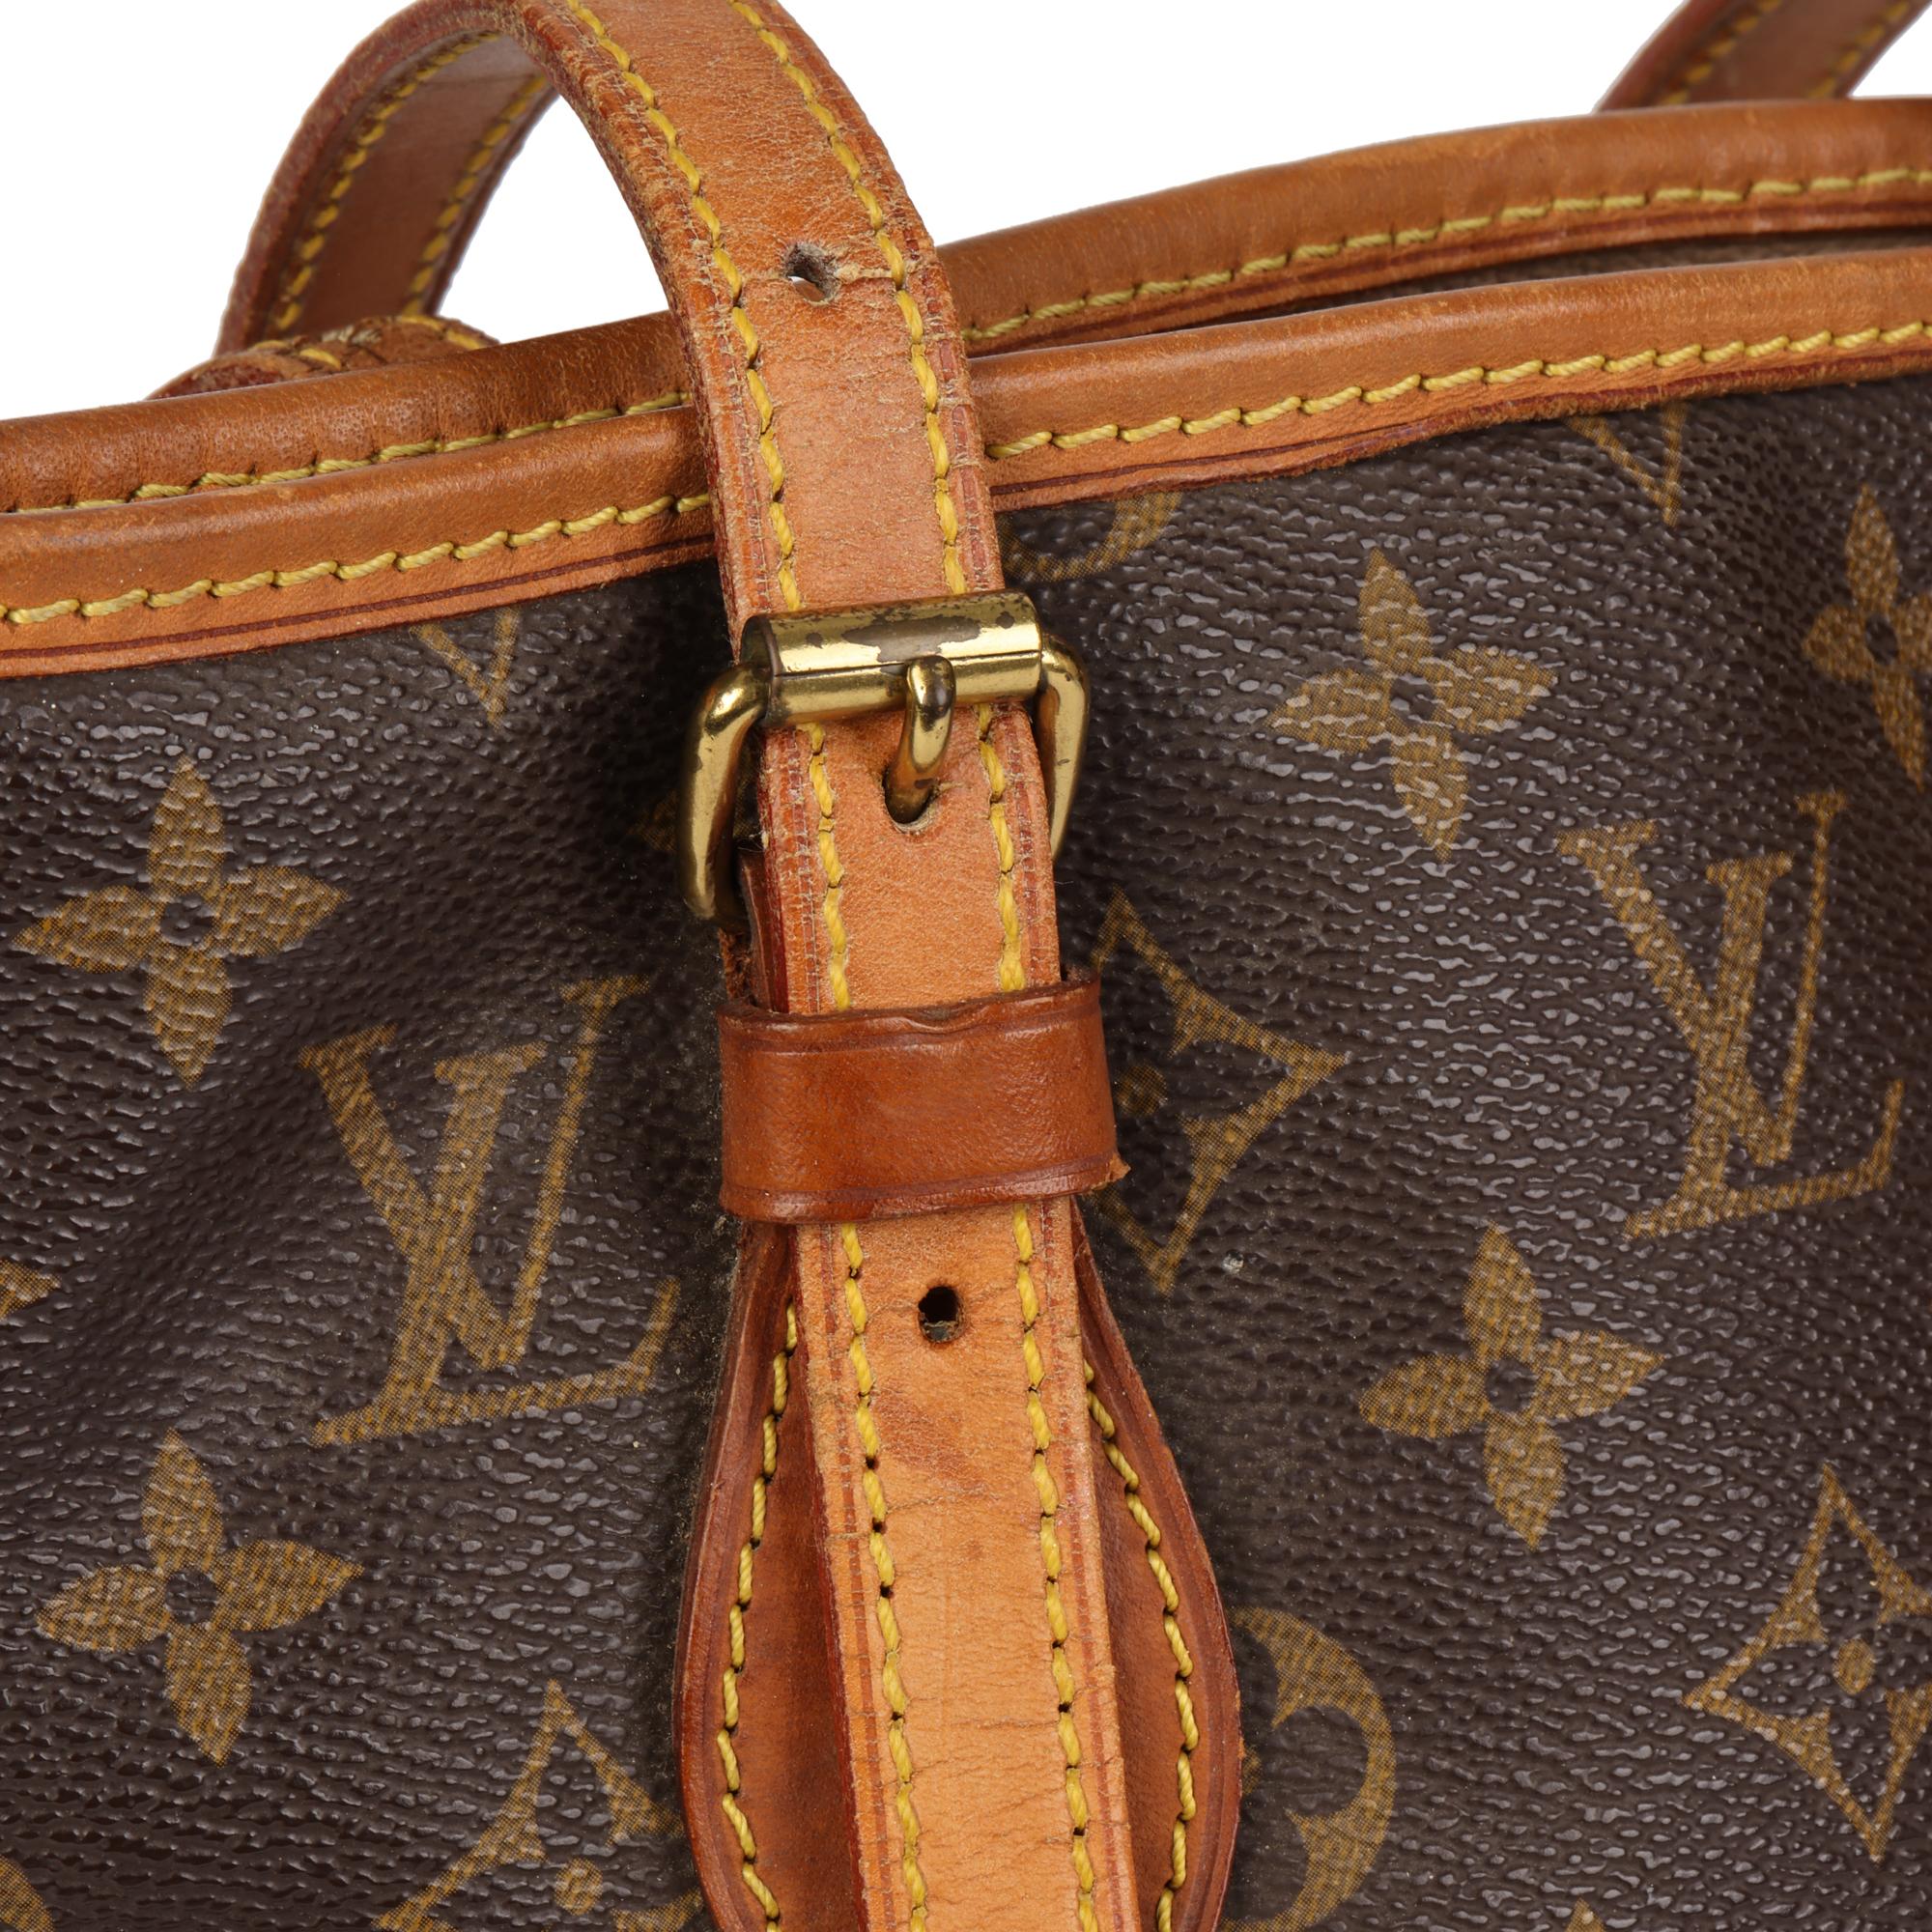 LOUIS VUITTON Brown Monogram Coated Canvas & Leather Bucket Bag PM with Pouch 2